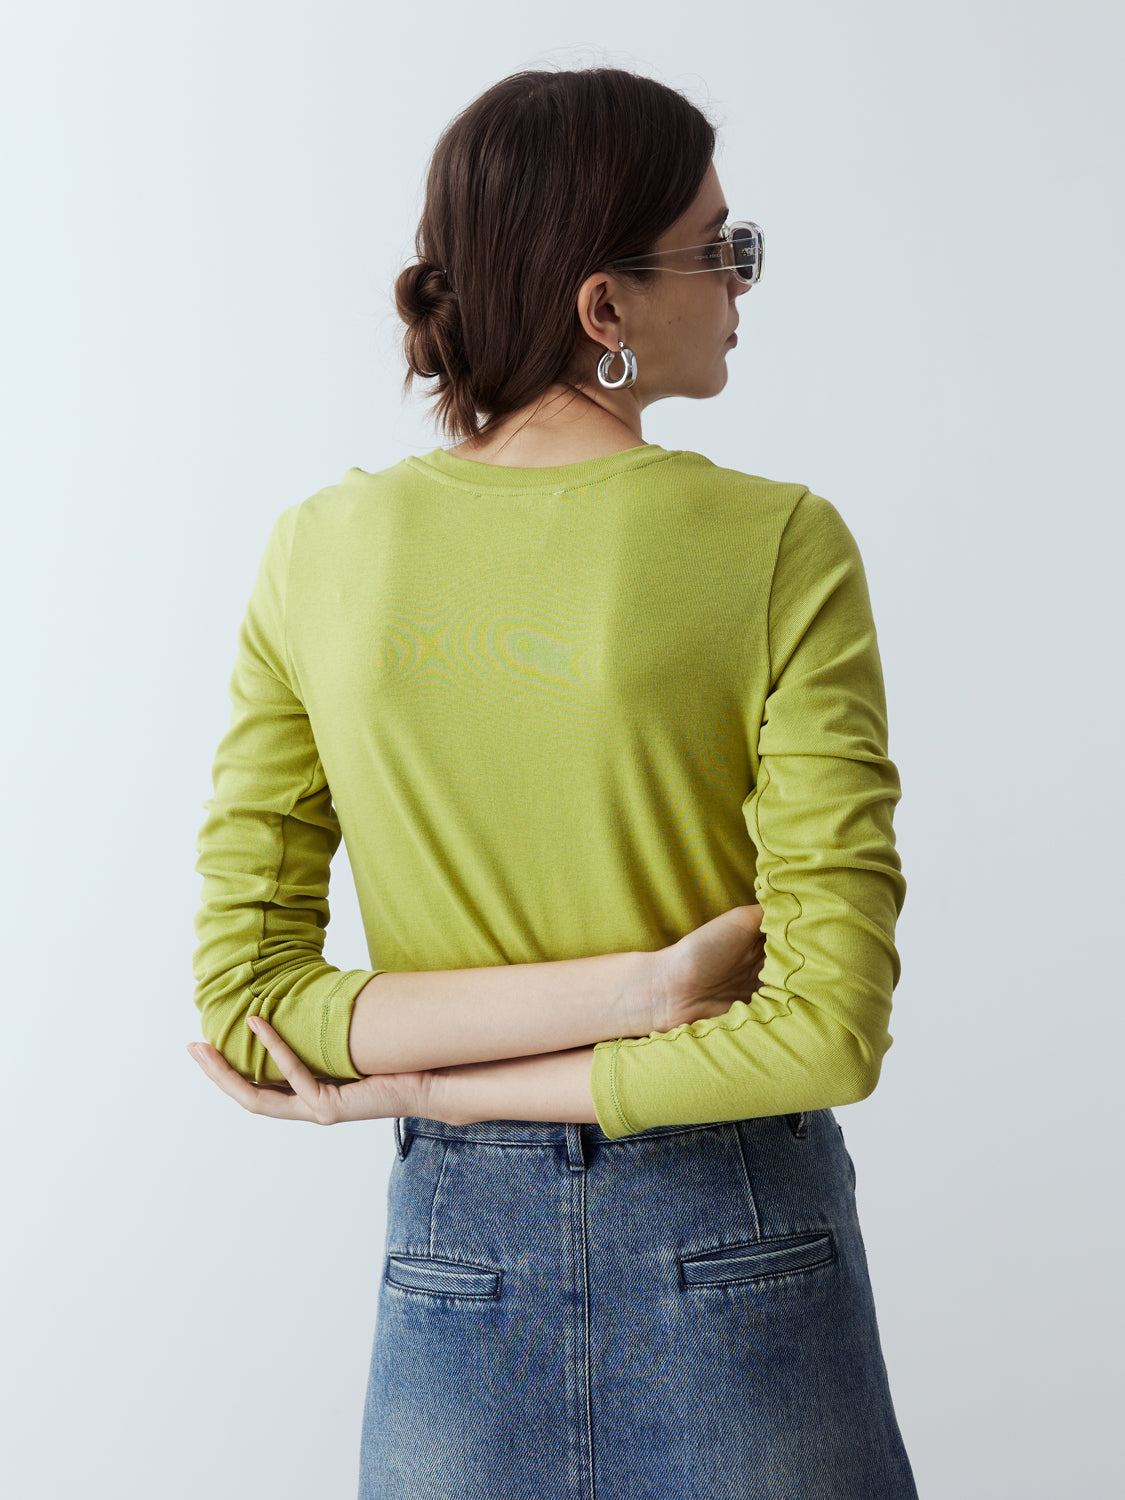 lime : Model is wearing the Fitted Long Sleeve T-Shirt in Lime, which comes with a rounded crew neckline and a centre front stitch line. Arm-hugging but gives a relaxed bodice. Worn with Denim Maxi Skirt and metallic silver heels.